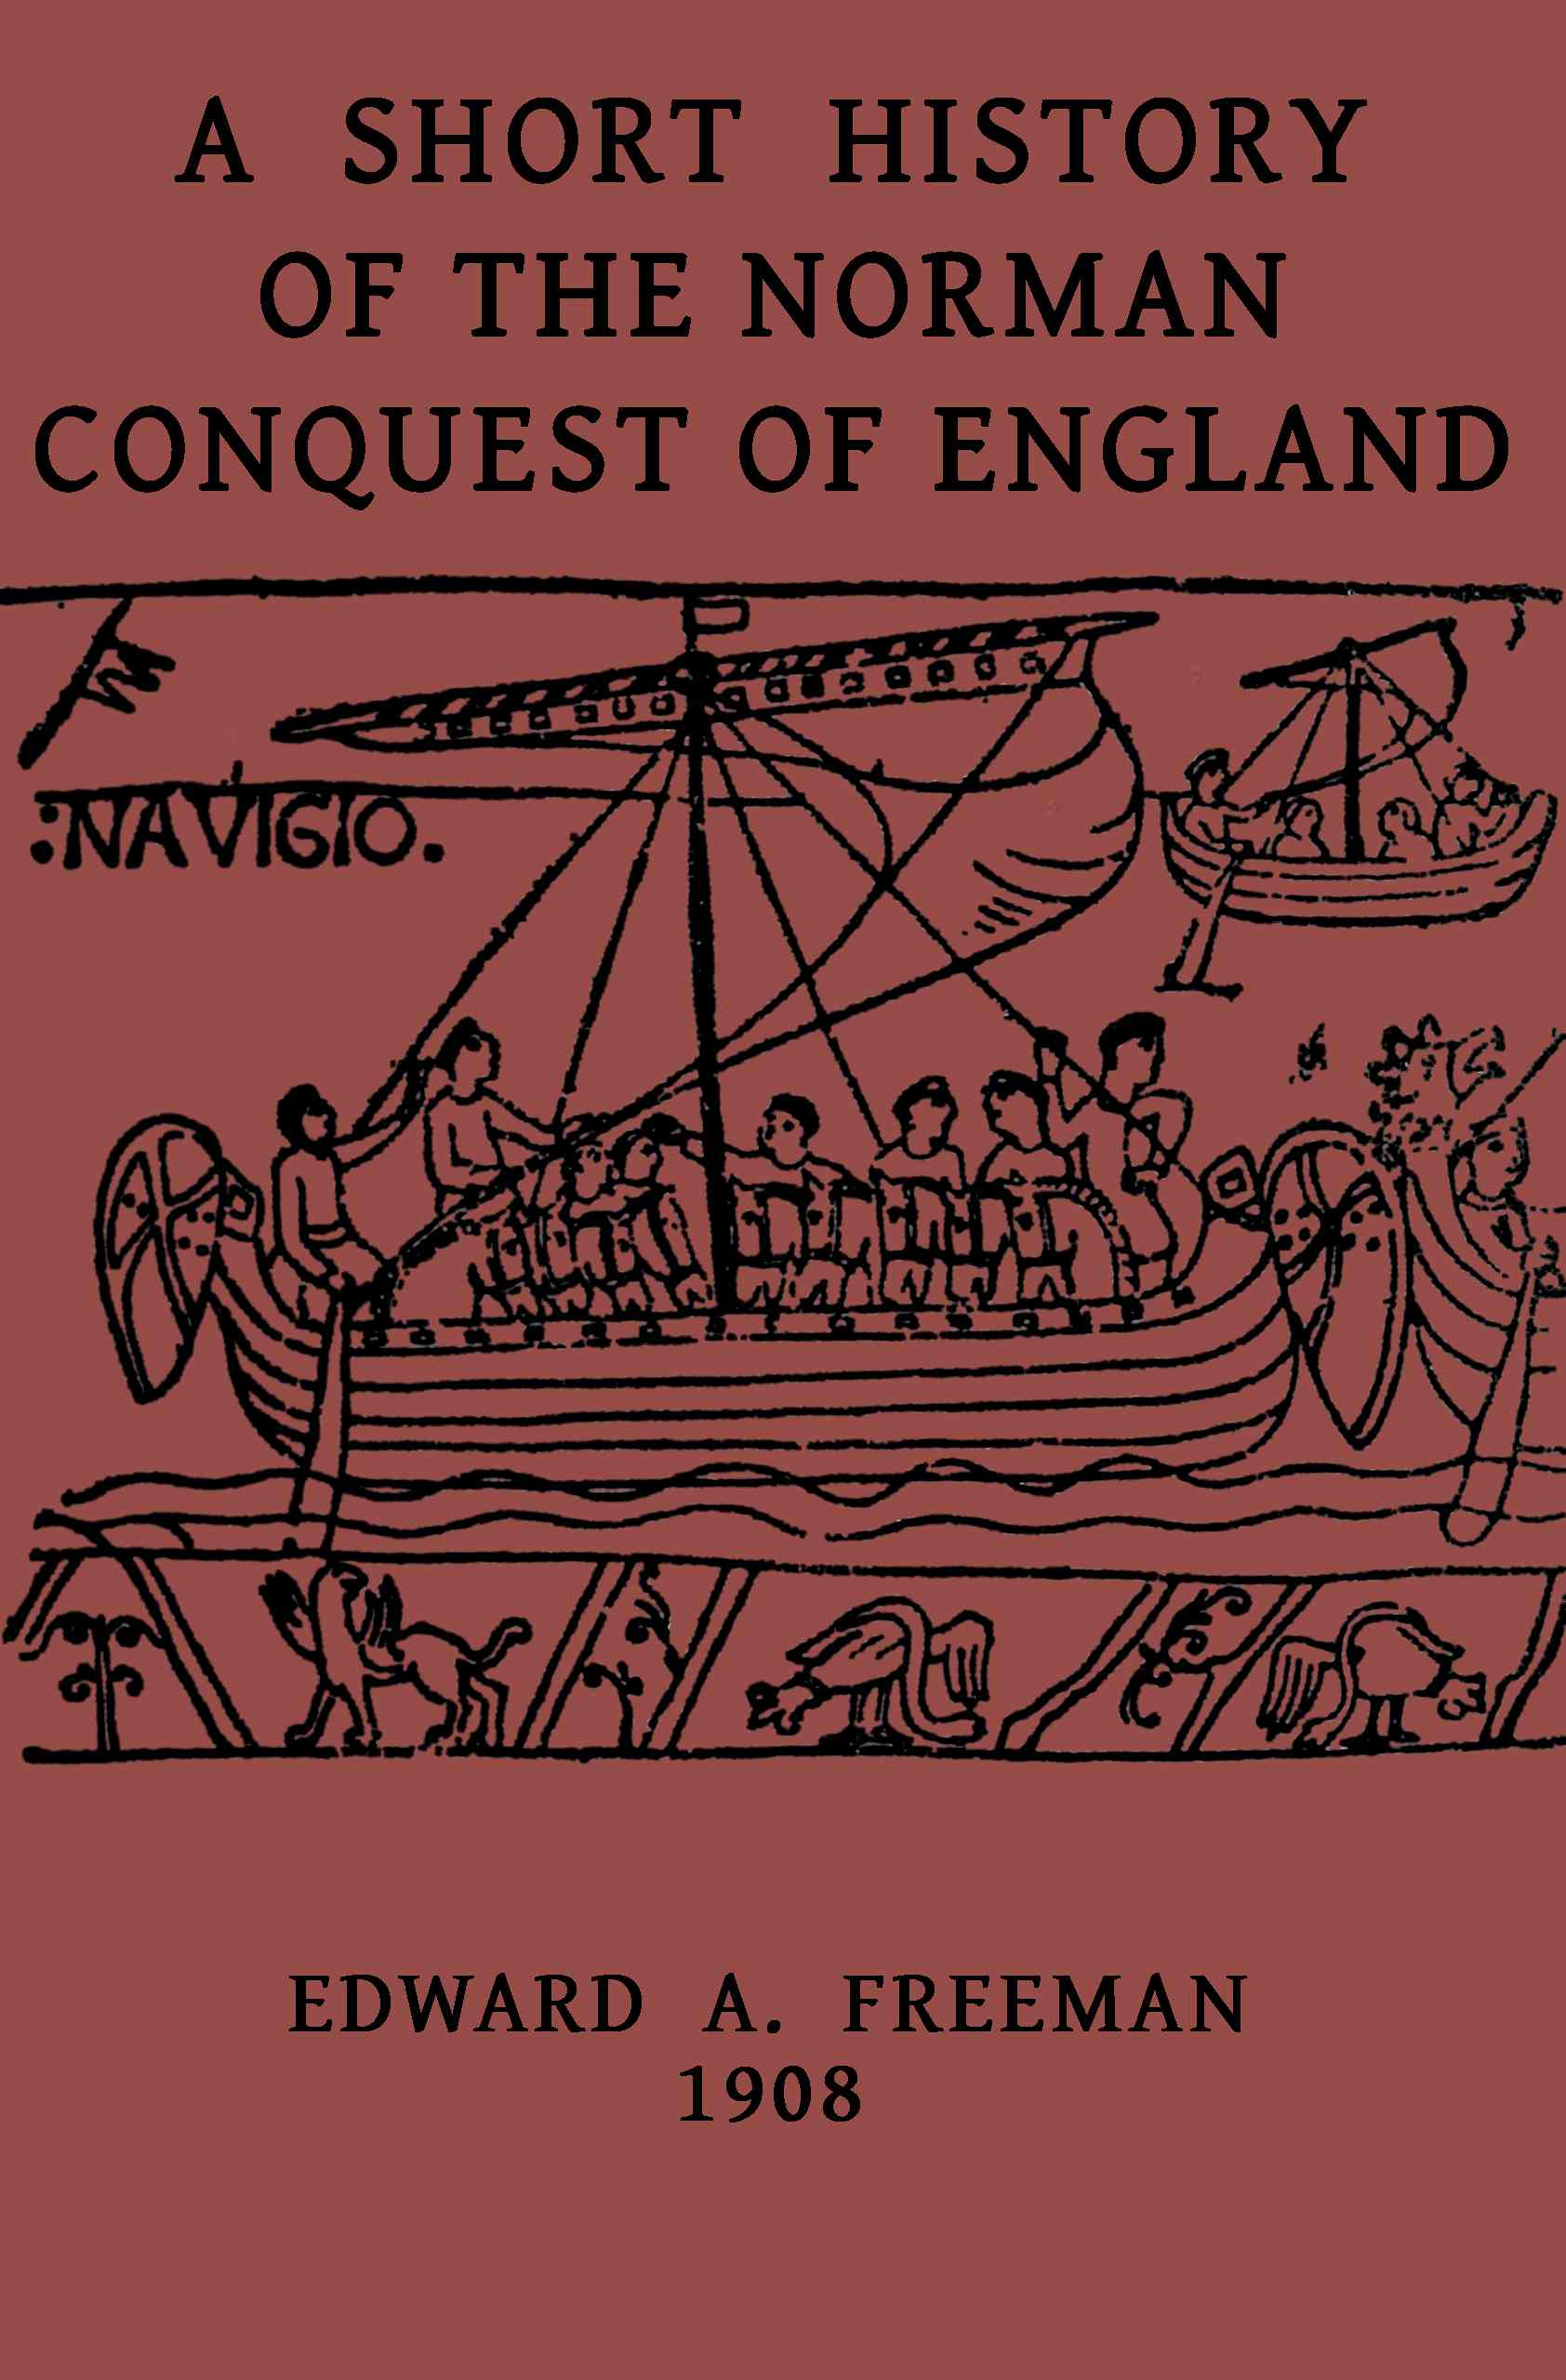 Danish Conquest Of England 1016: How Did It Happen?